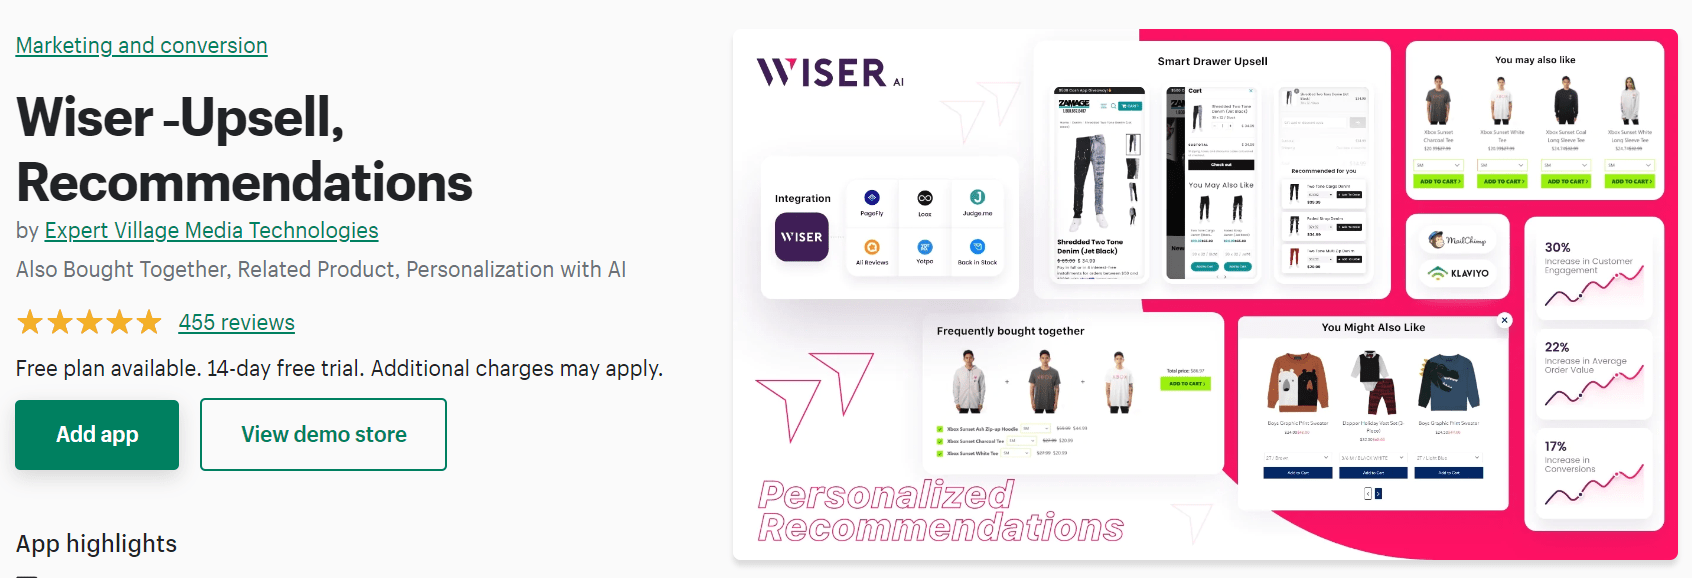 Wiser product recommendations